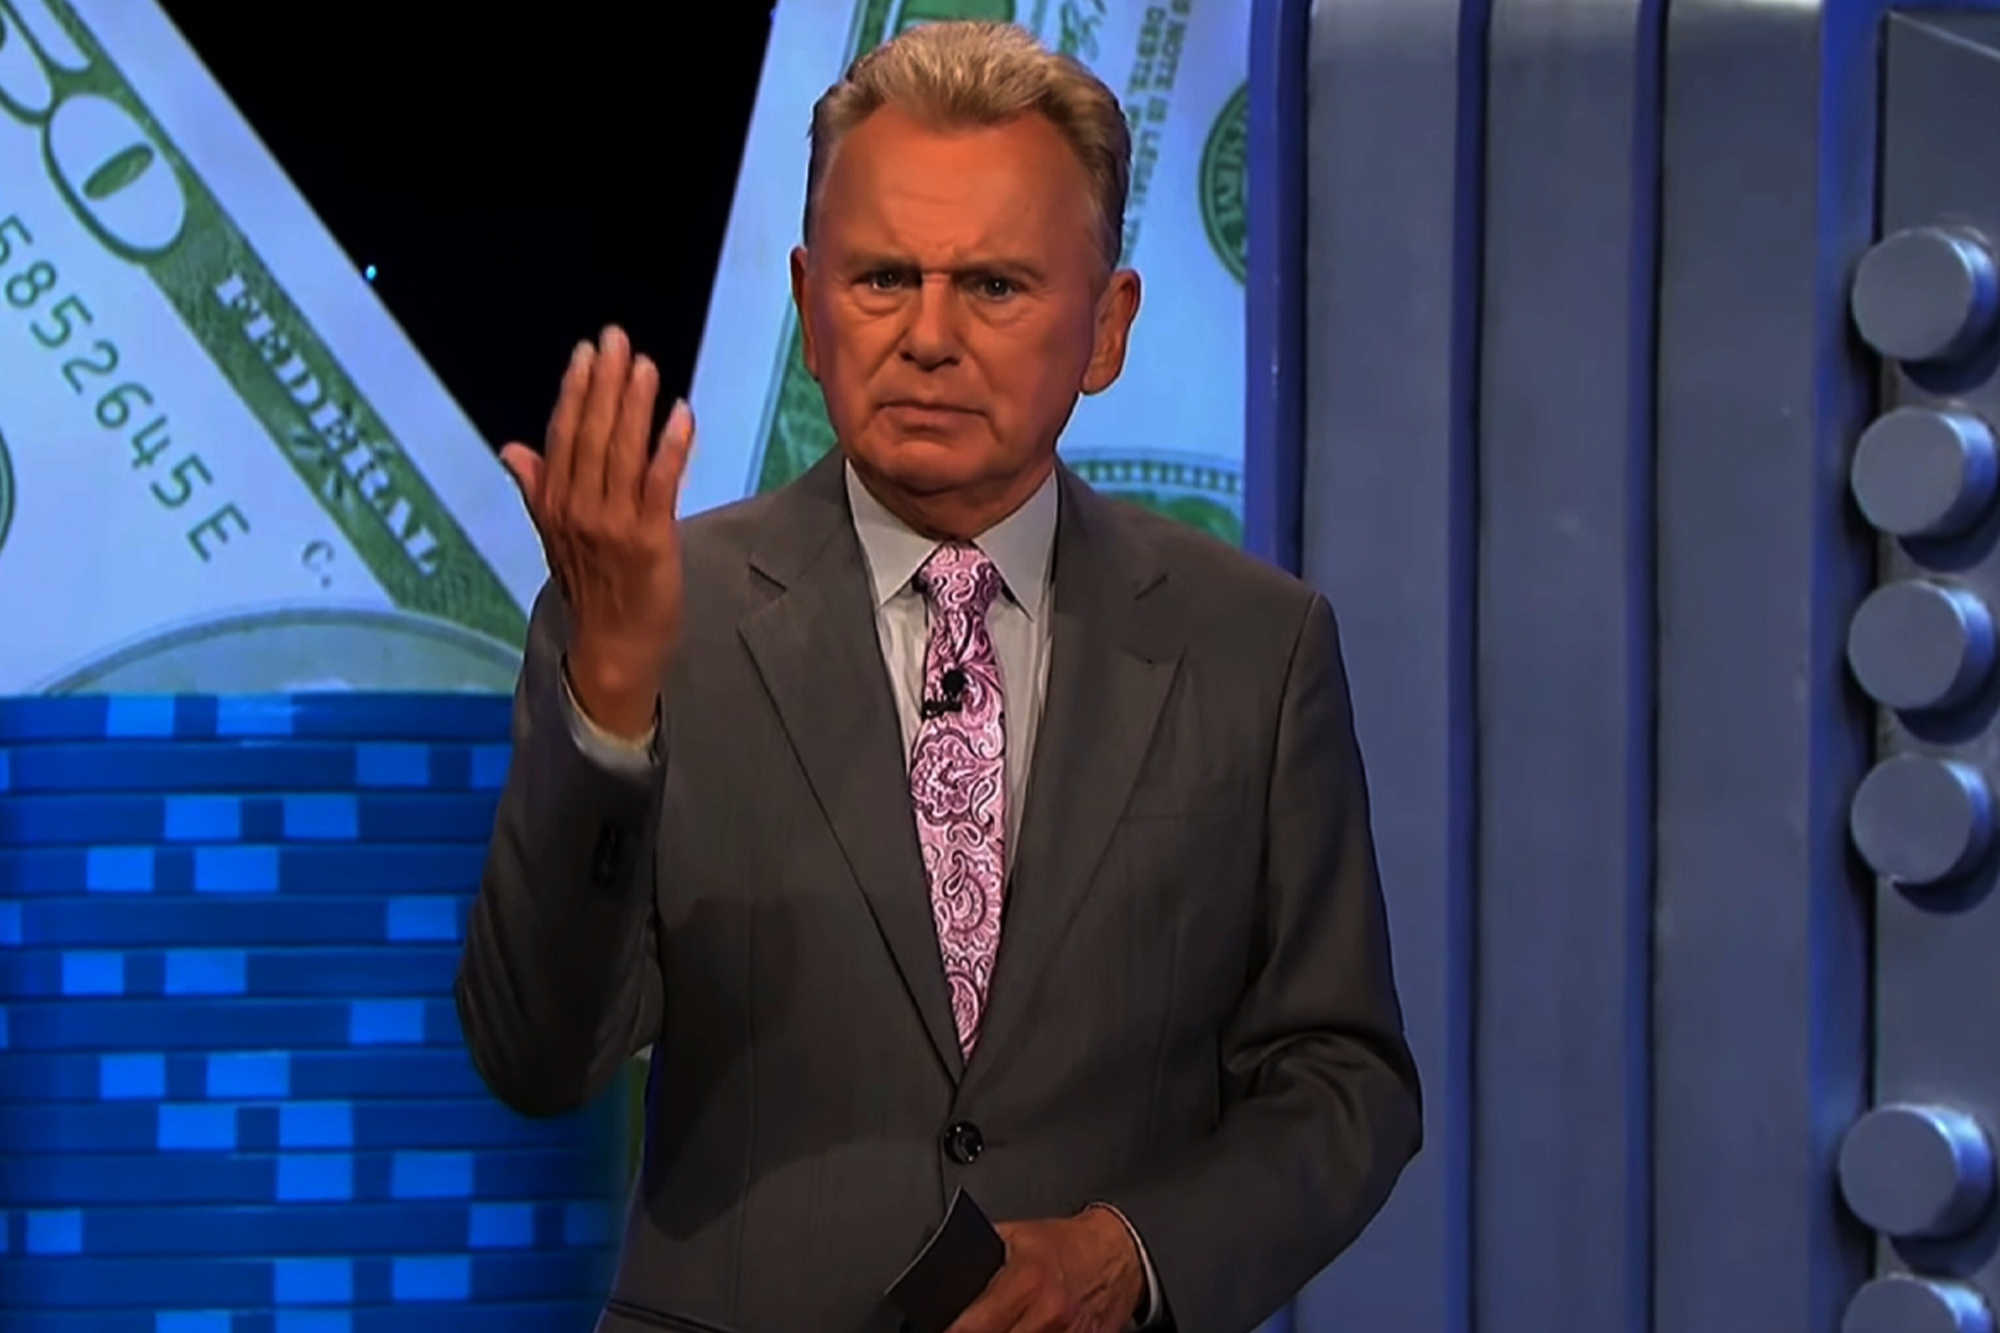 ‘Wheel of Fortune’ host Pat Sajak has surprising reaction to contestant’s brutal answer